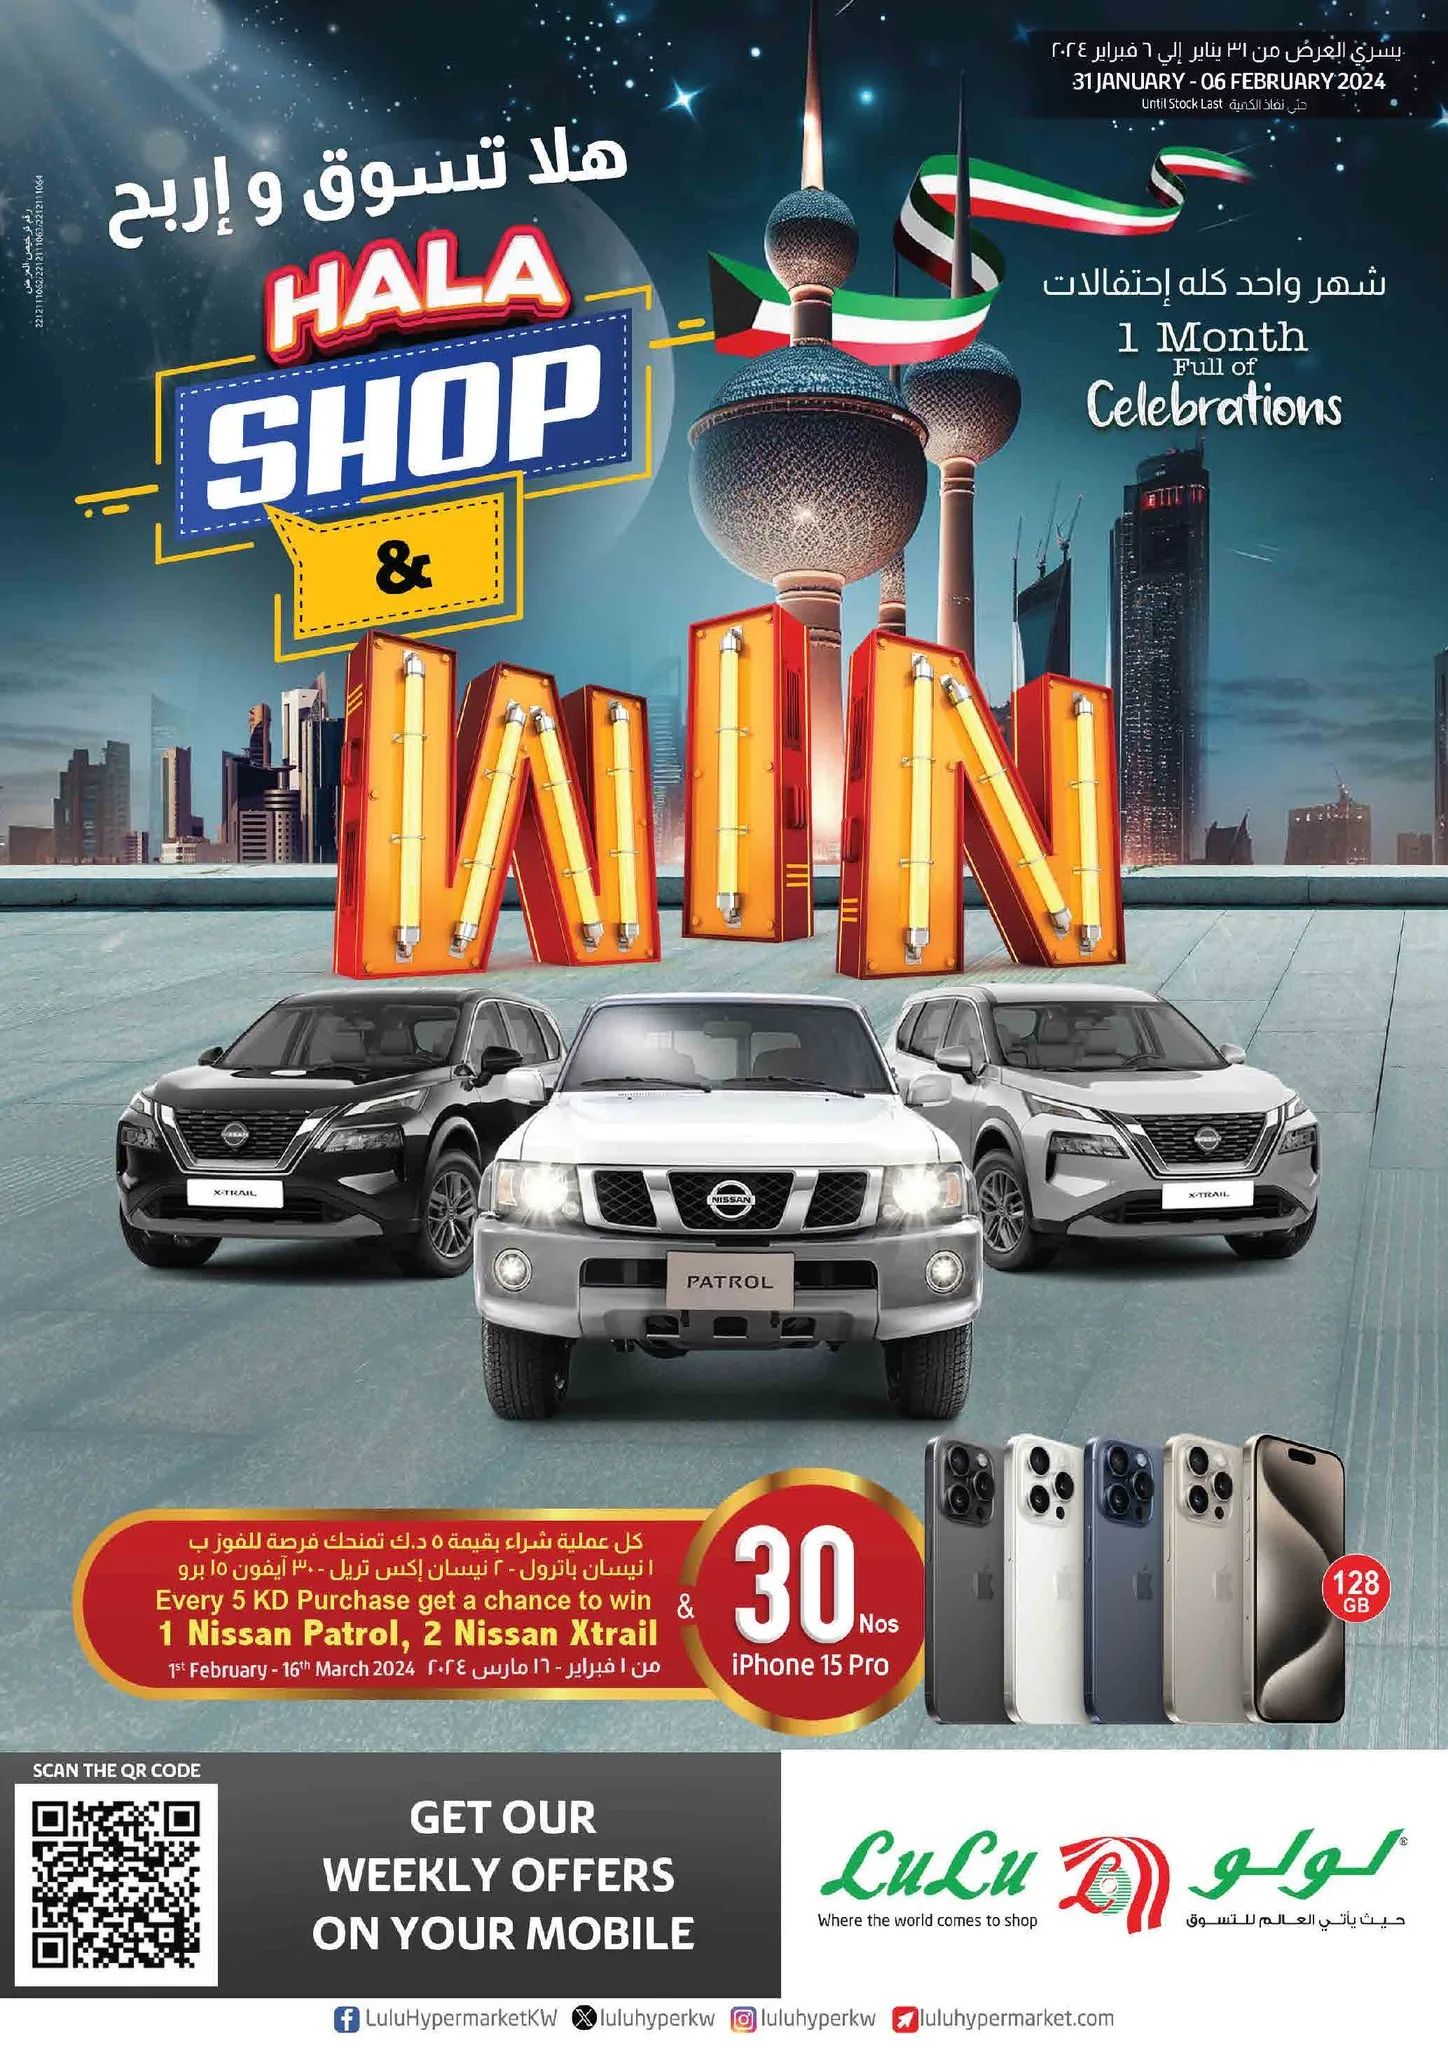 LULU HALA SHOP & WIN 1 Month Full of Celebration and EXCLUSIVE DEALS